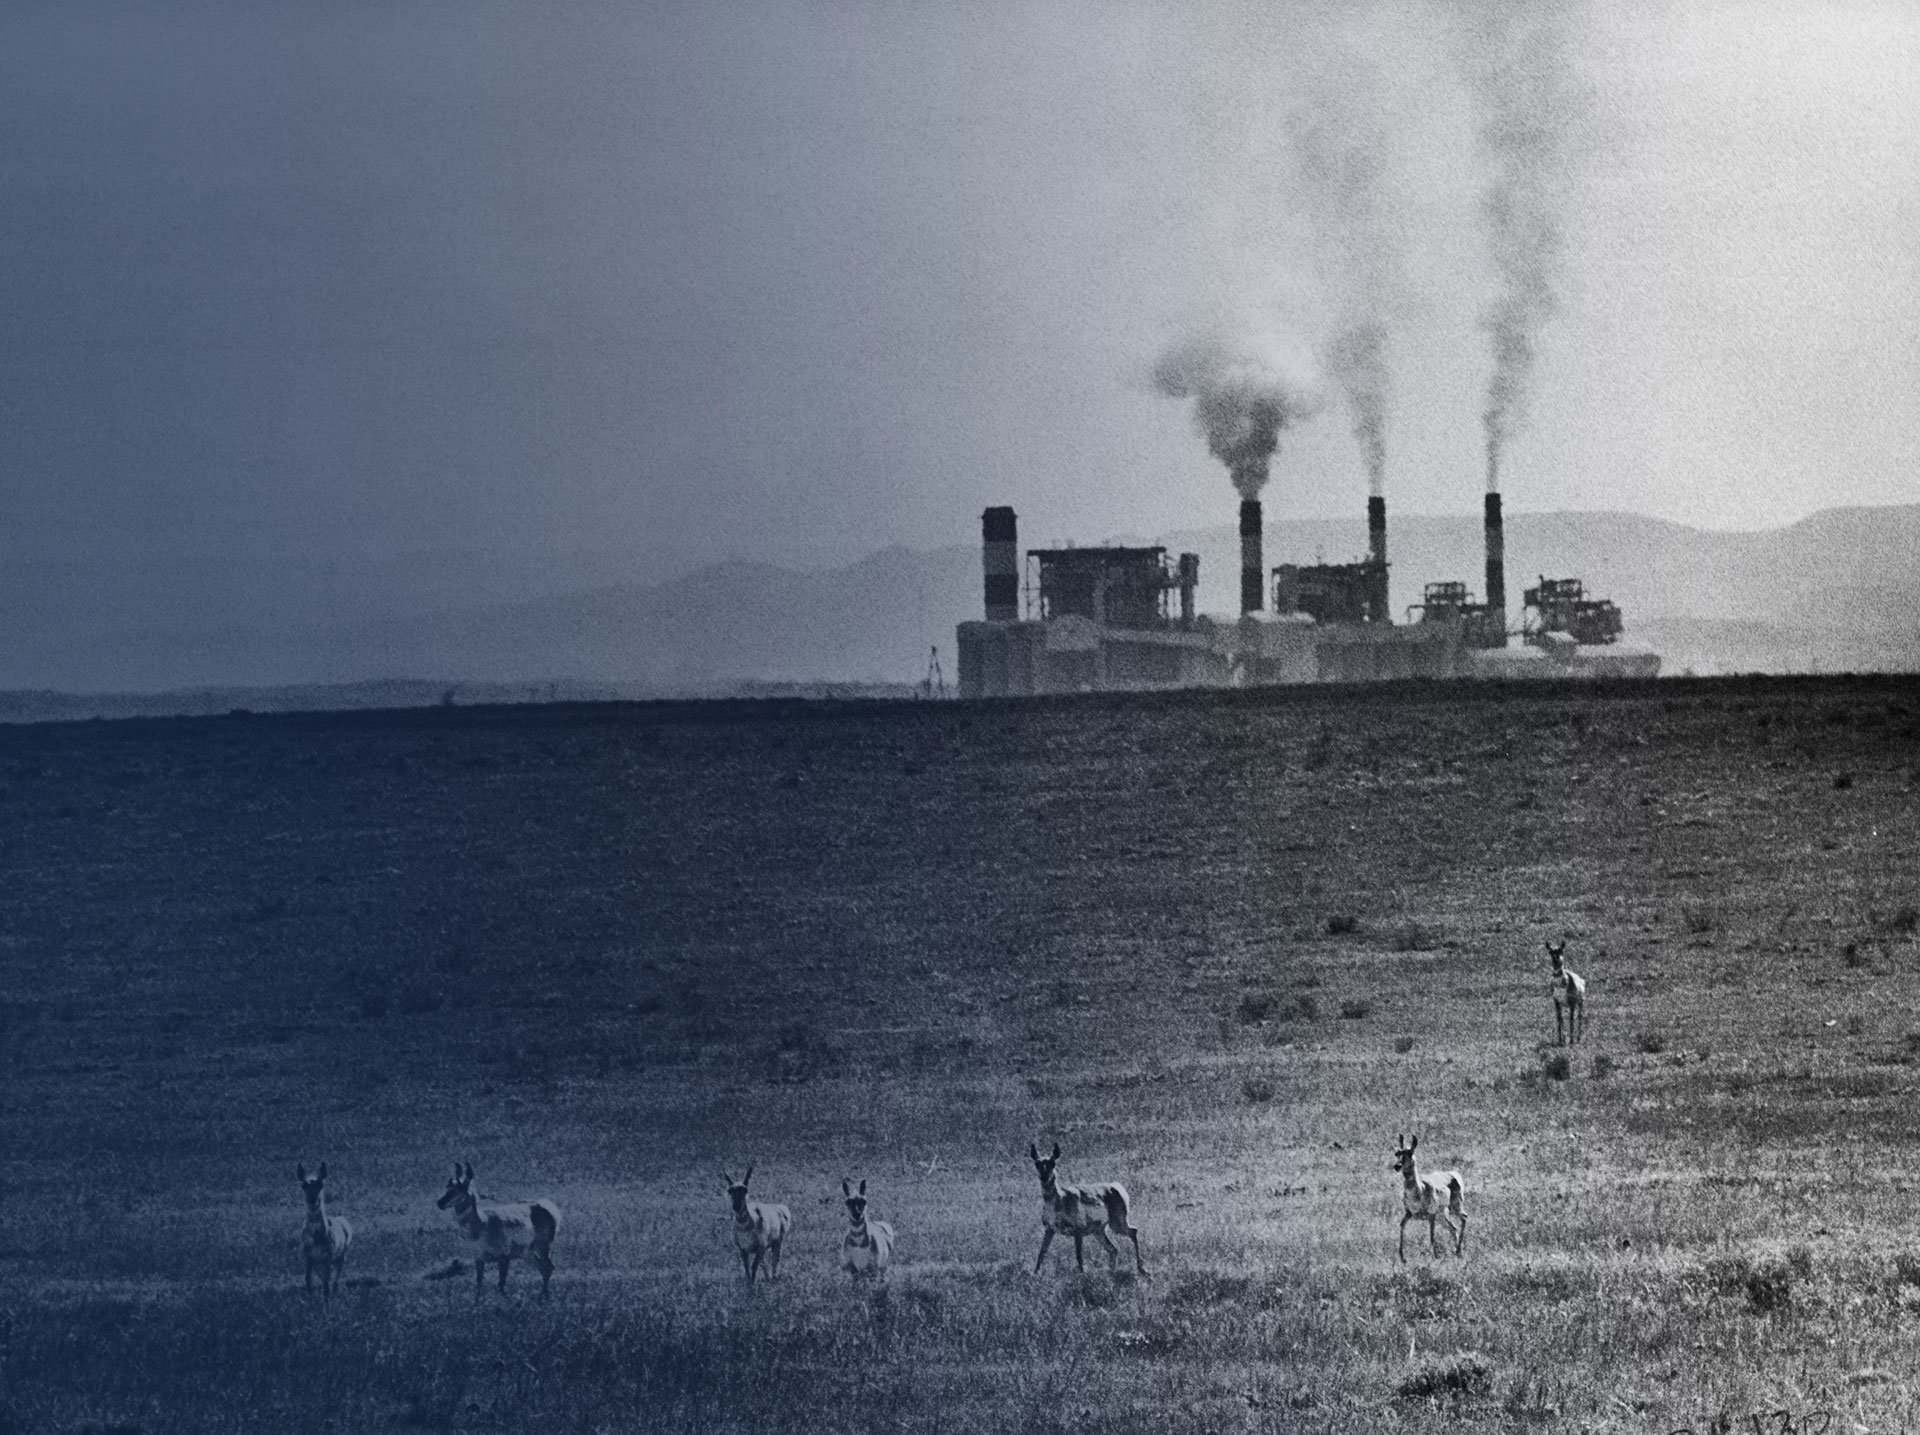 A herd of antelope shared its range with the Dave Johnston power plant of Pacific Light and Power Co. near Glendo, Wyoming, in 1974.